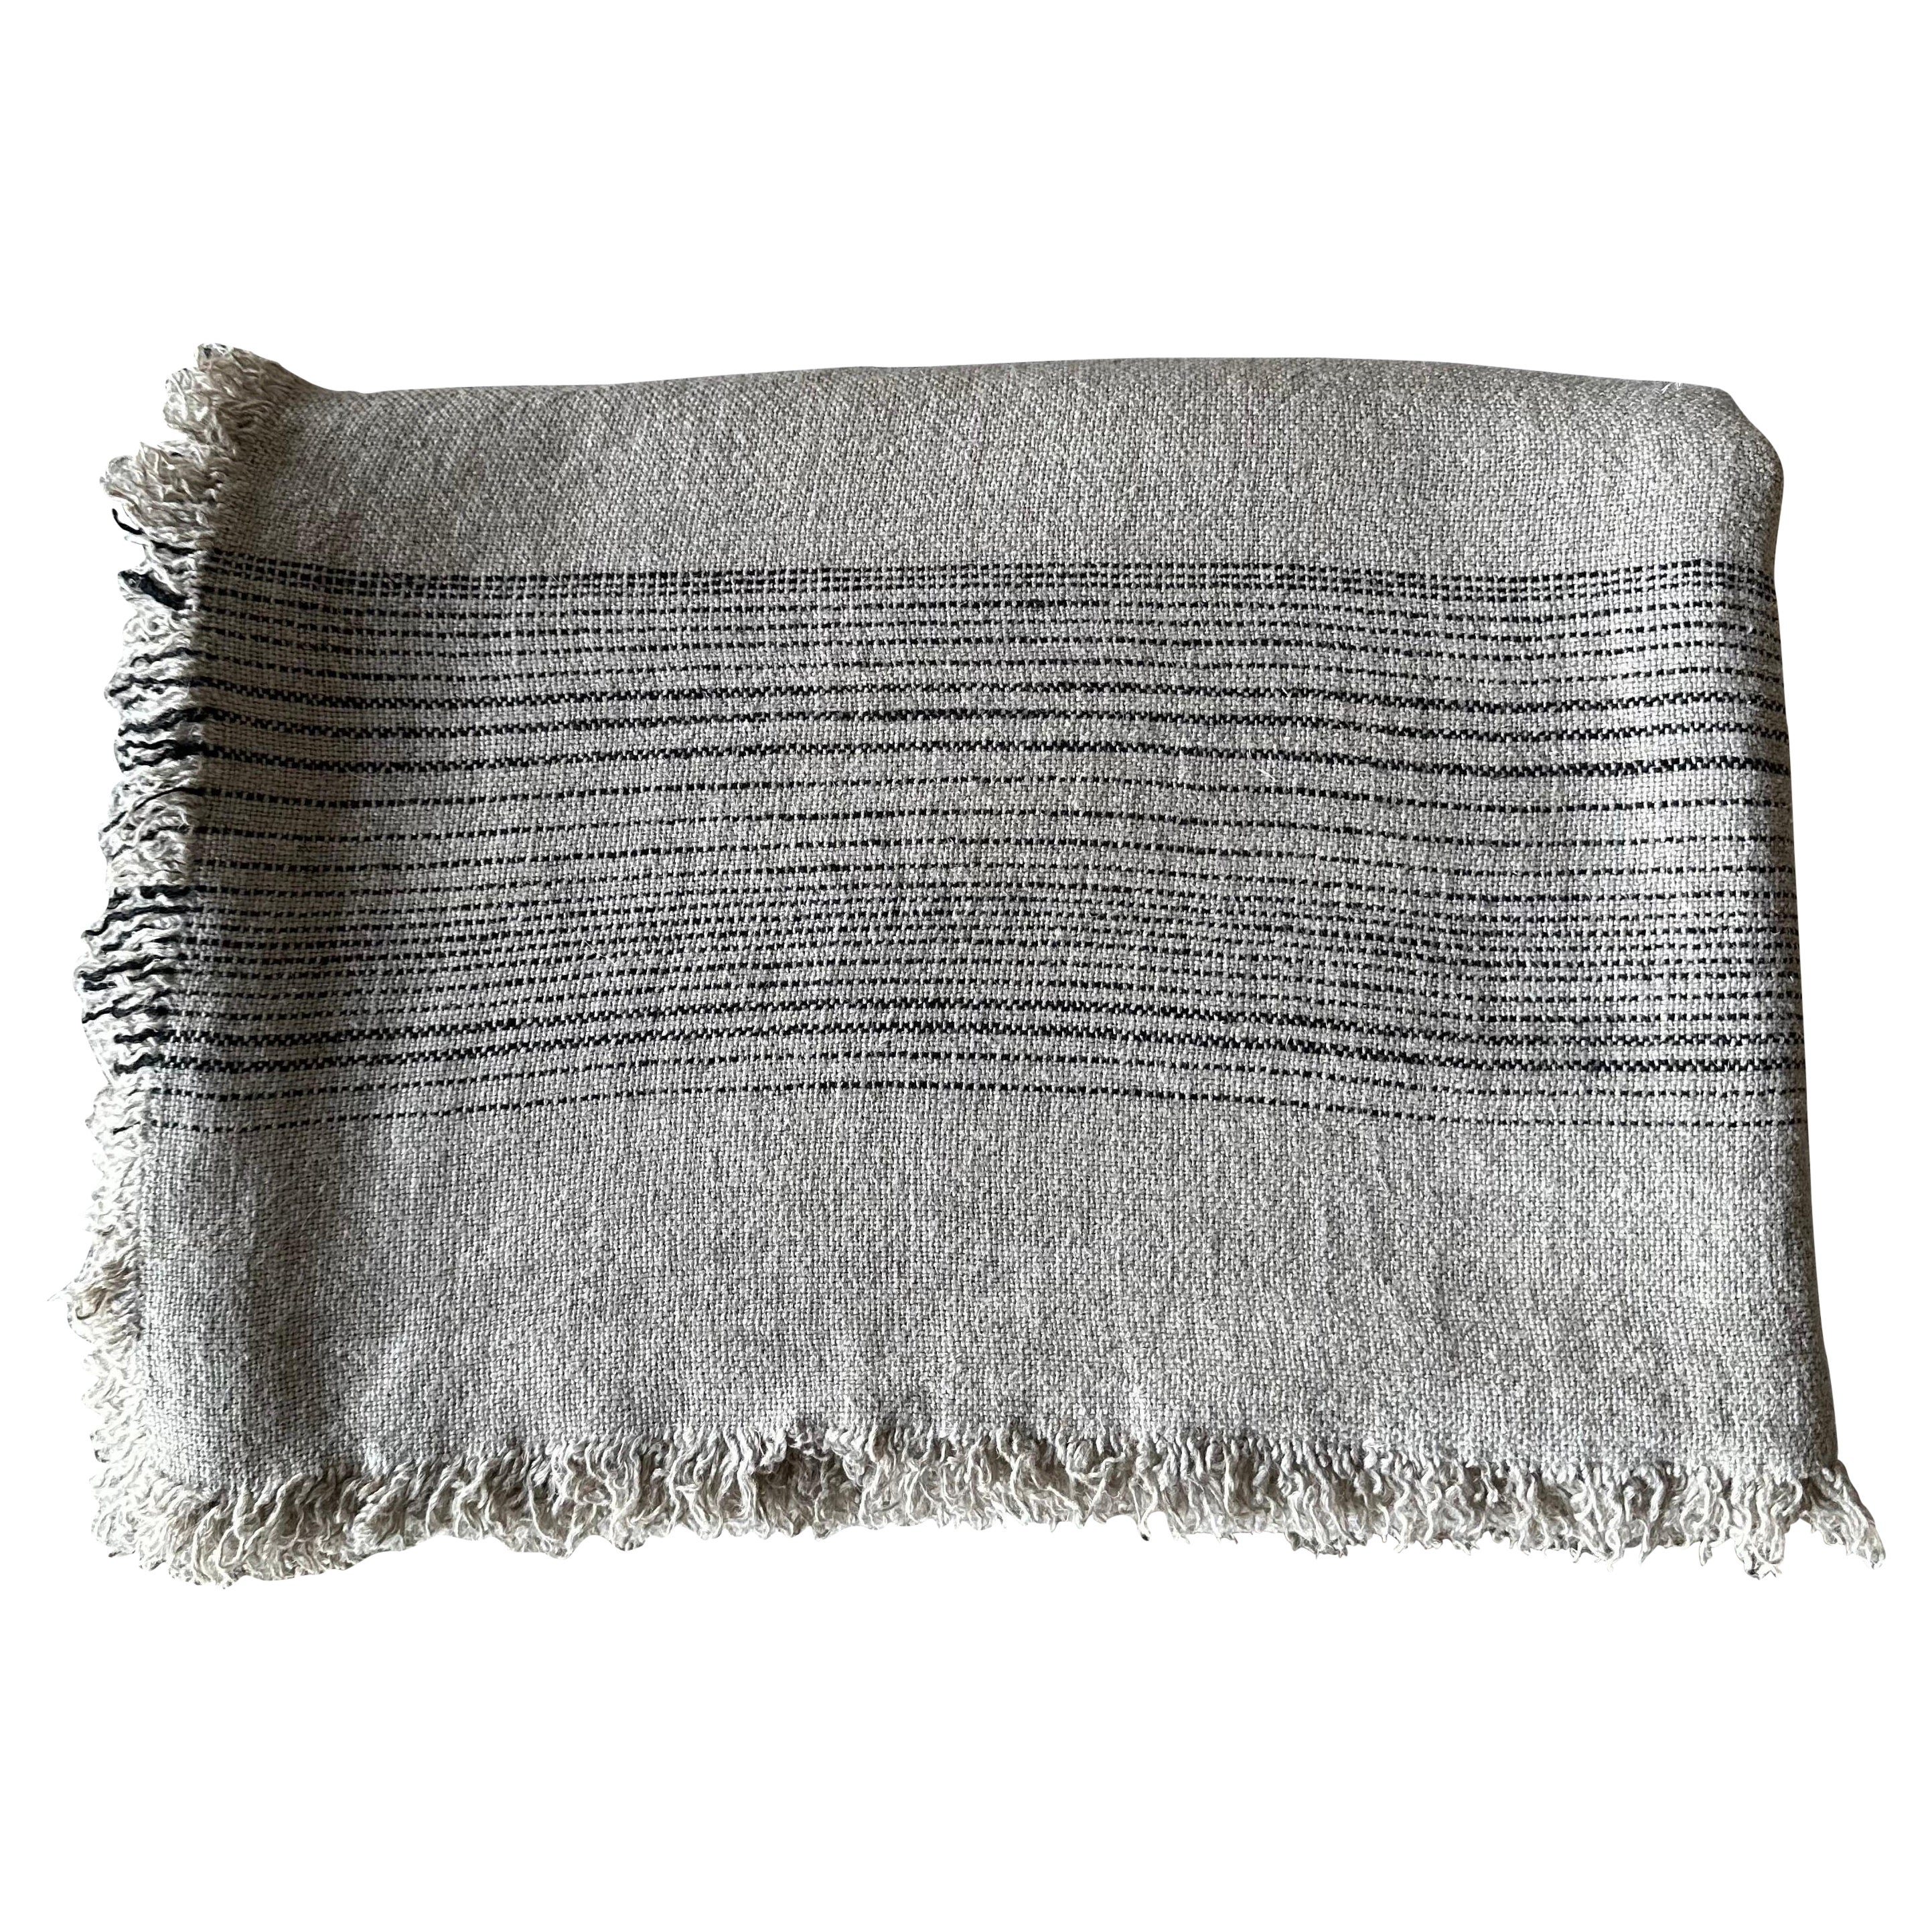 French Flax Linen Throw with Stripes